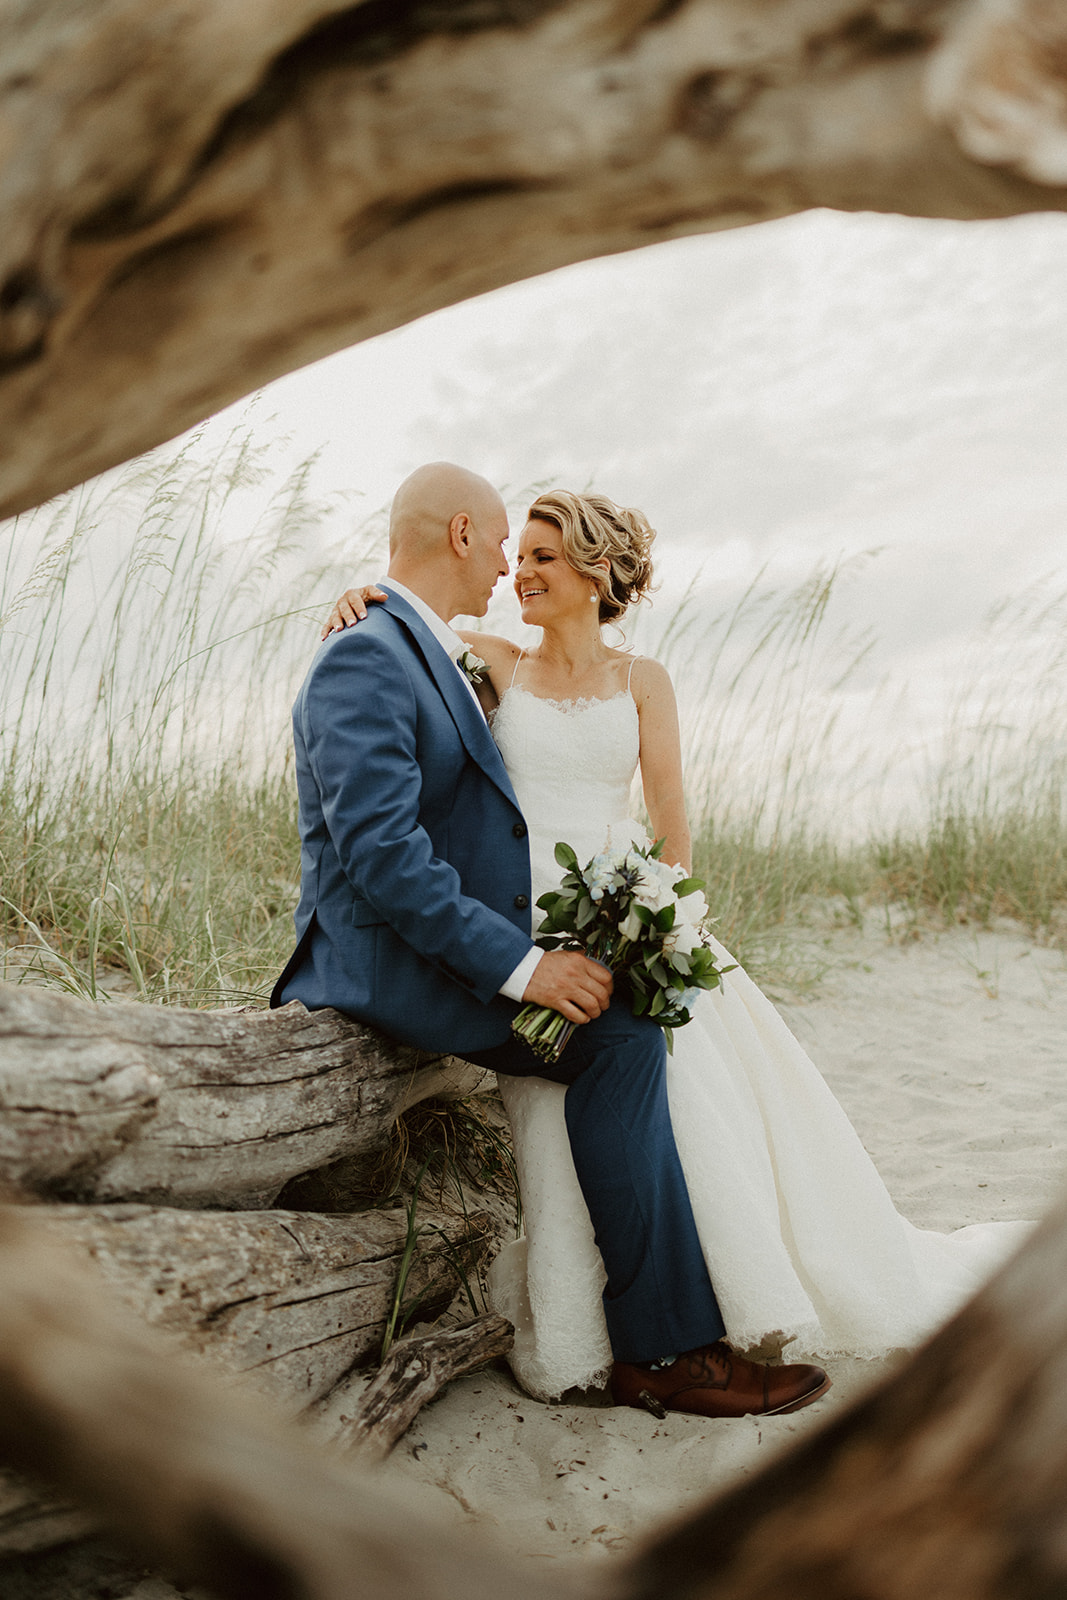 the bride and groom sitting on a log at the beach together